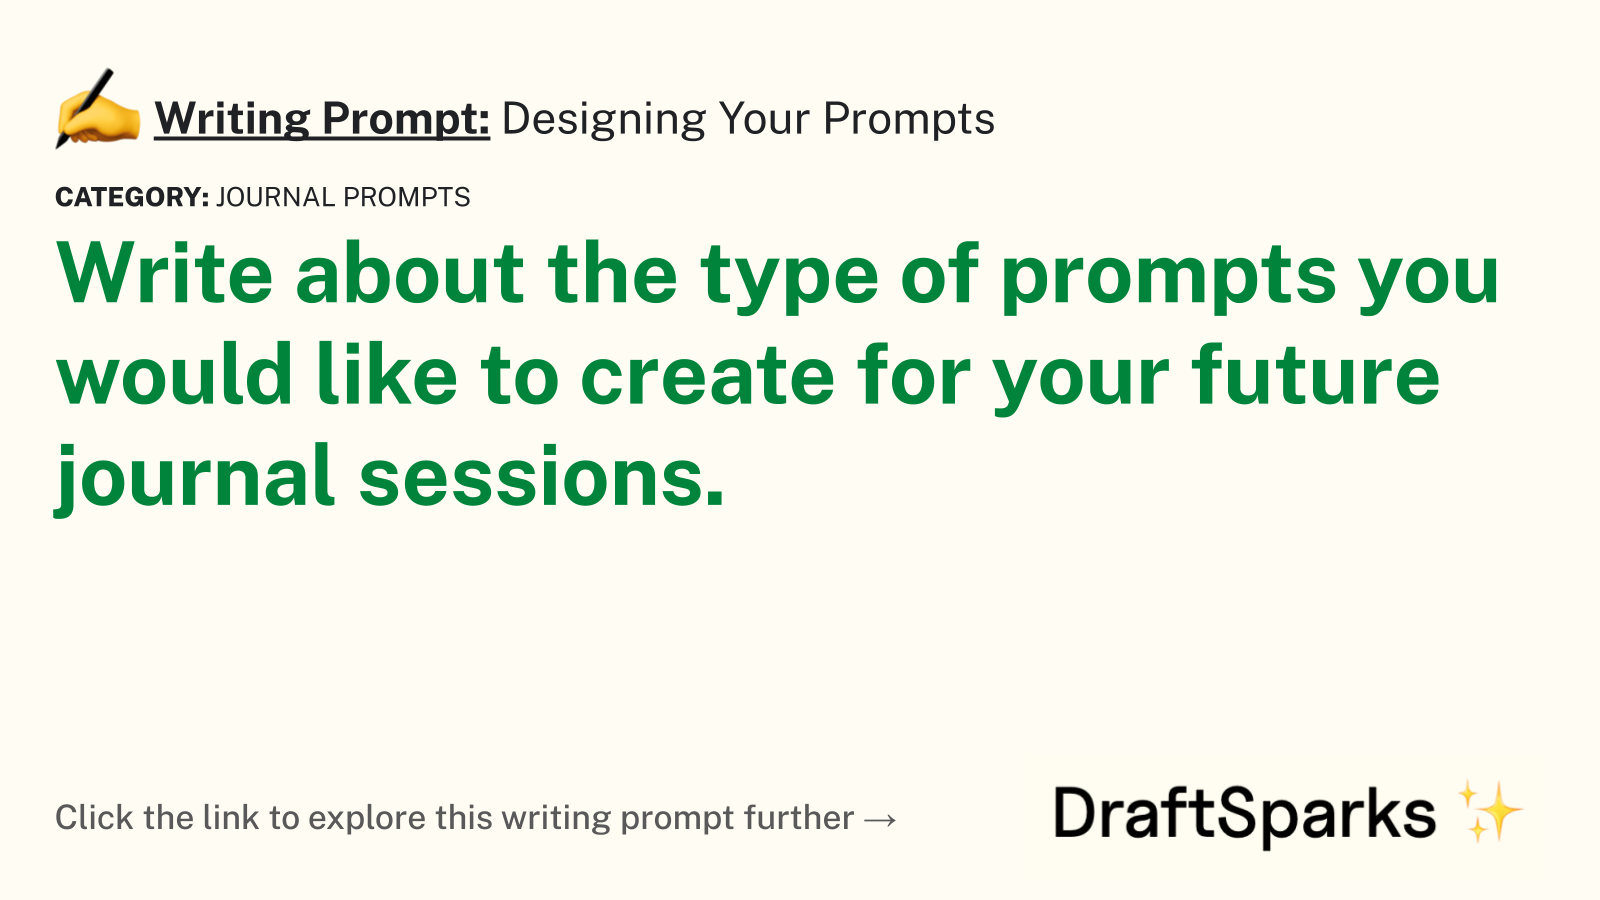 Designing Your Prompts